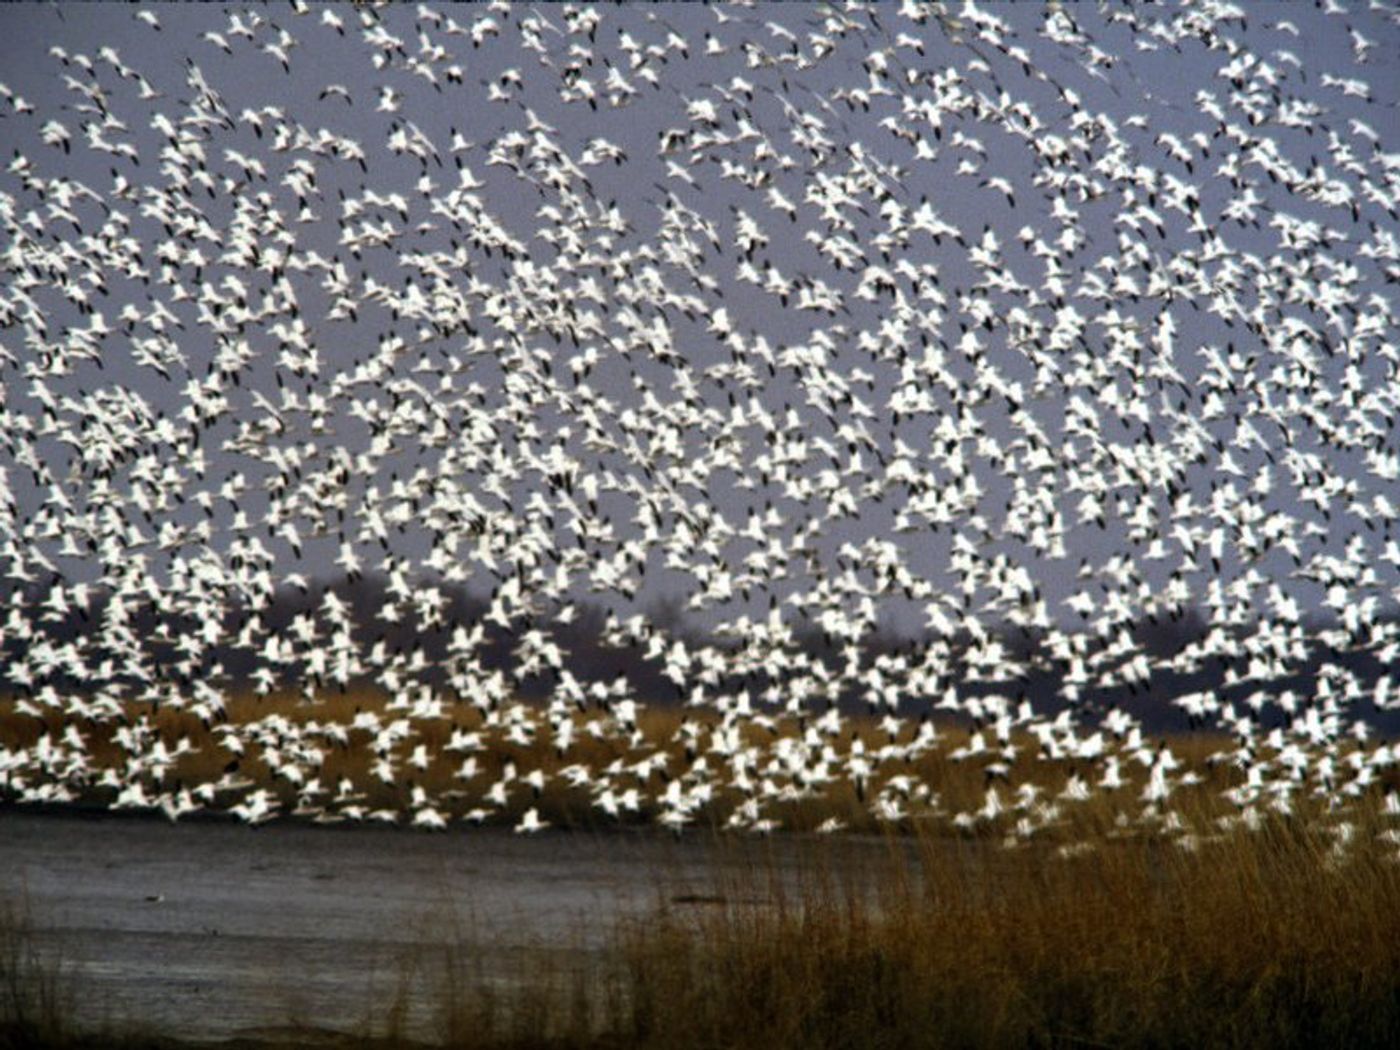 A flock of snow geese.